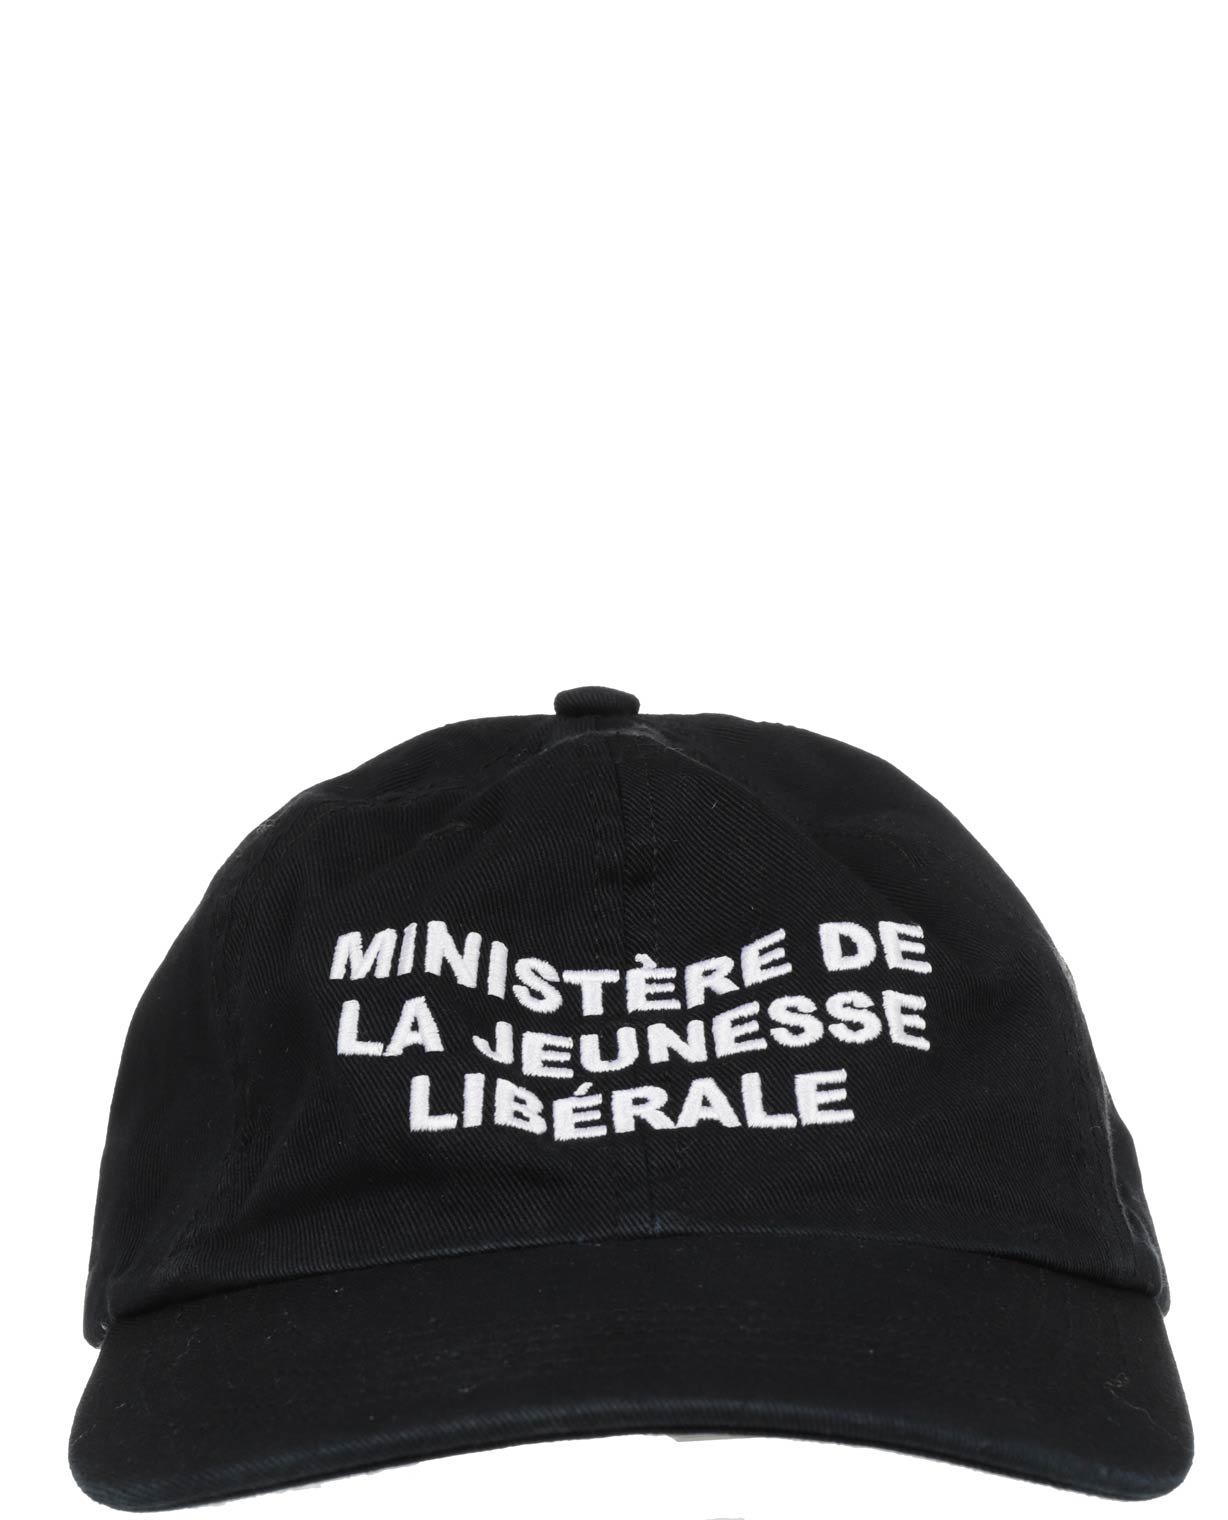 Liberal Youth Ministry Black Hat